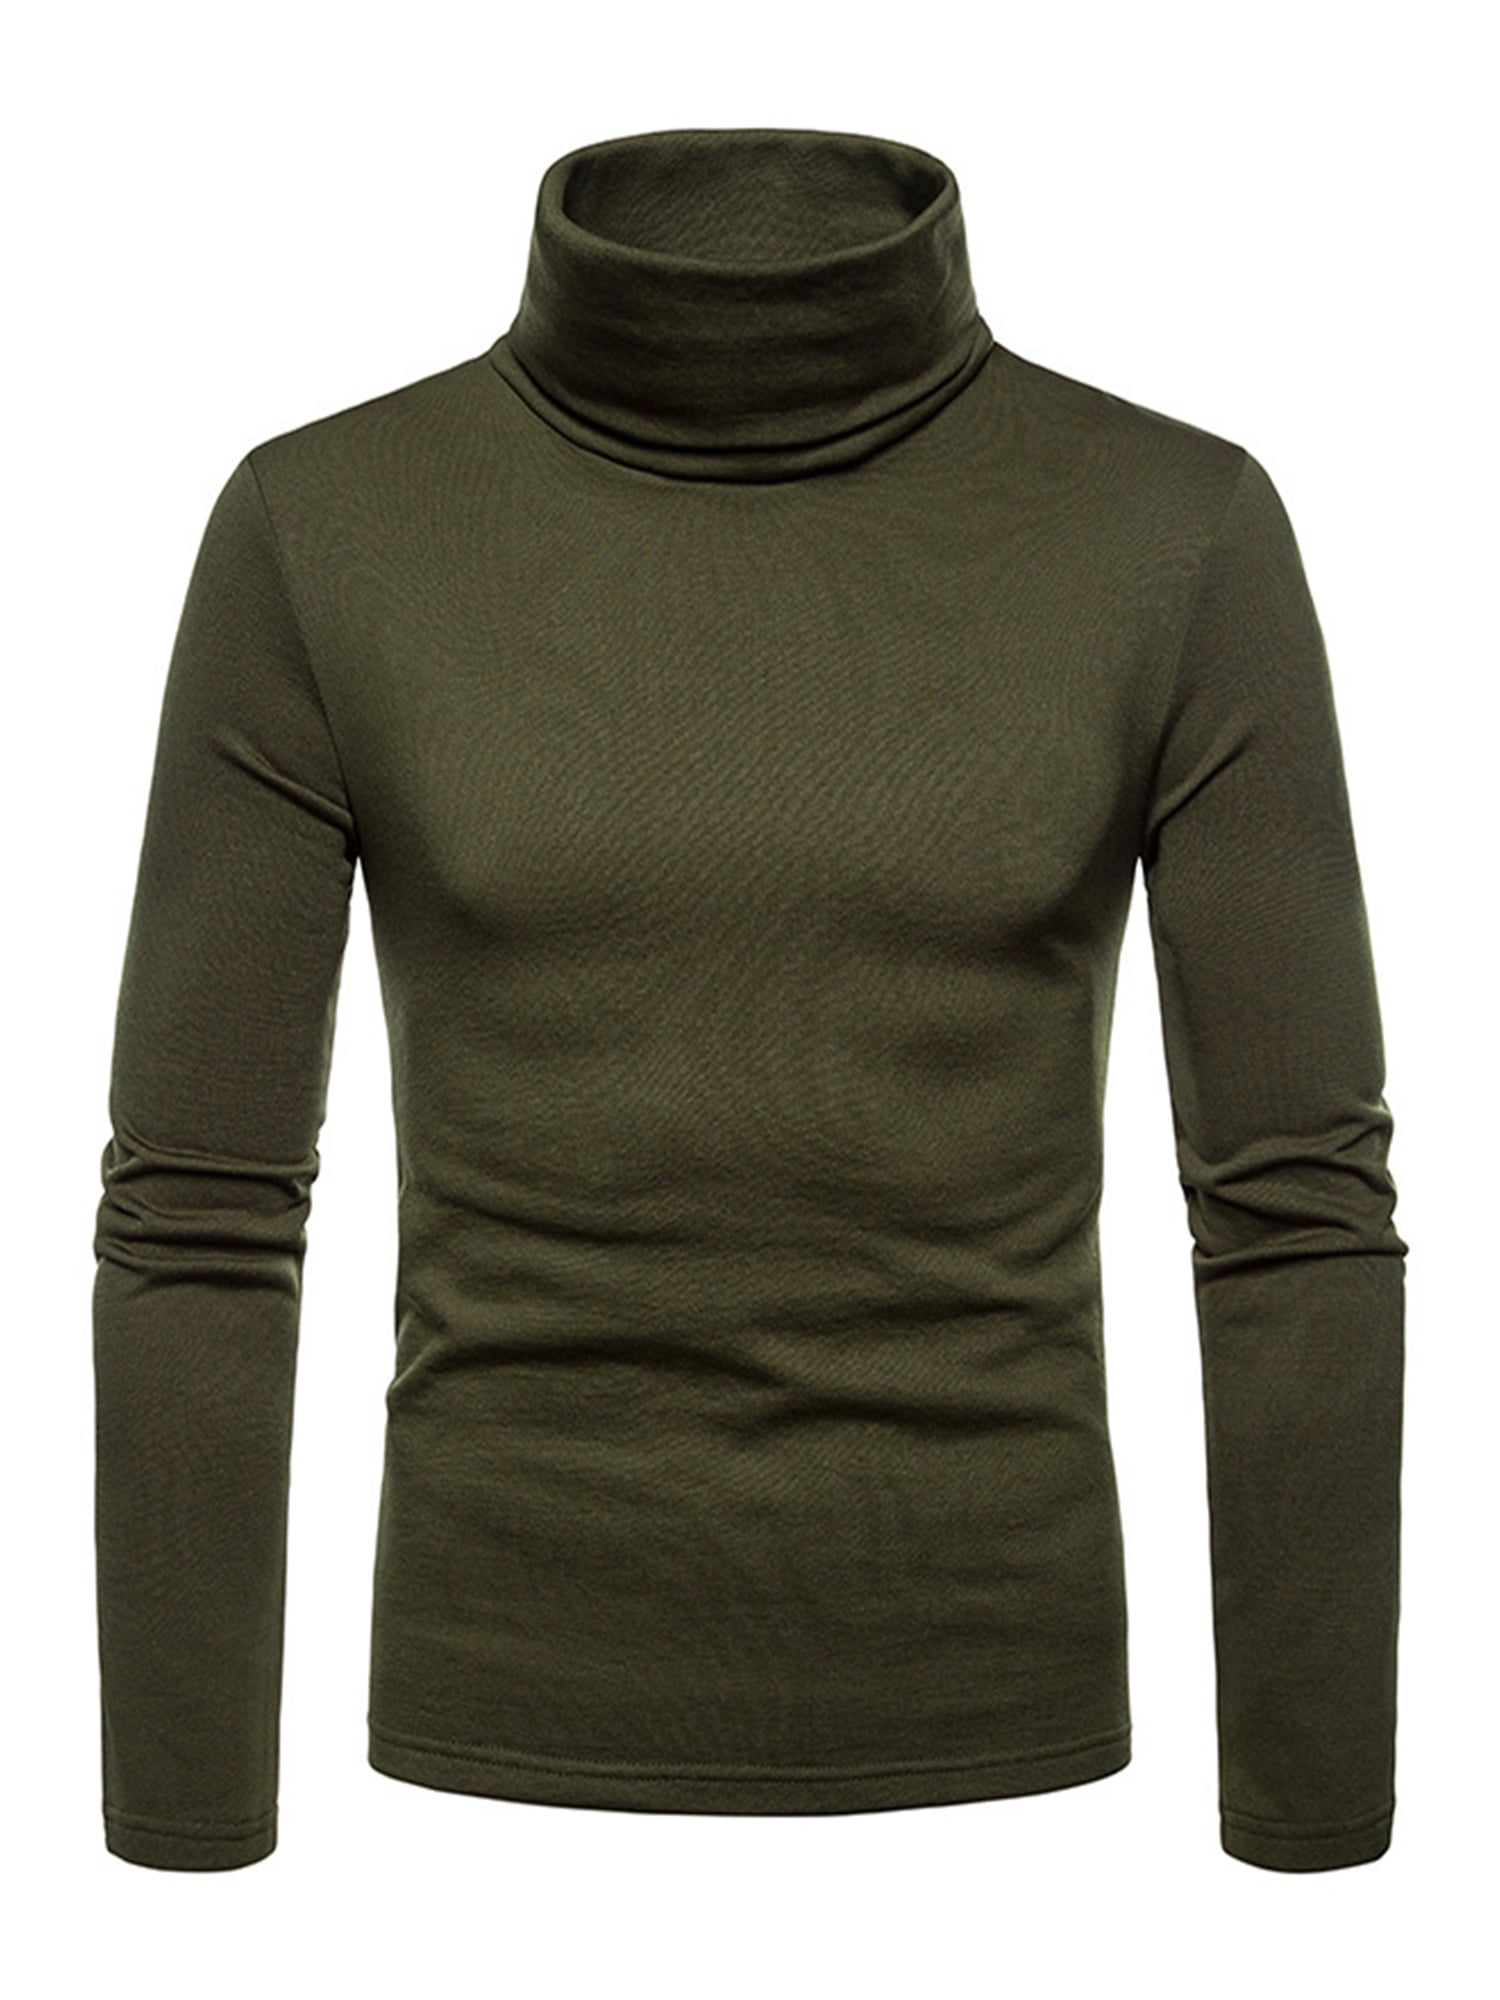 Men's High Turtle Neck Sweater Thermal Under Base Layer T-shirt Slim Fit Tops 